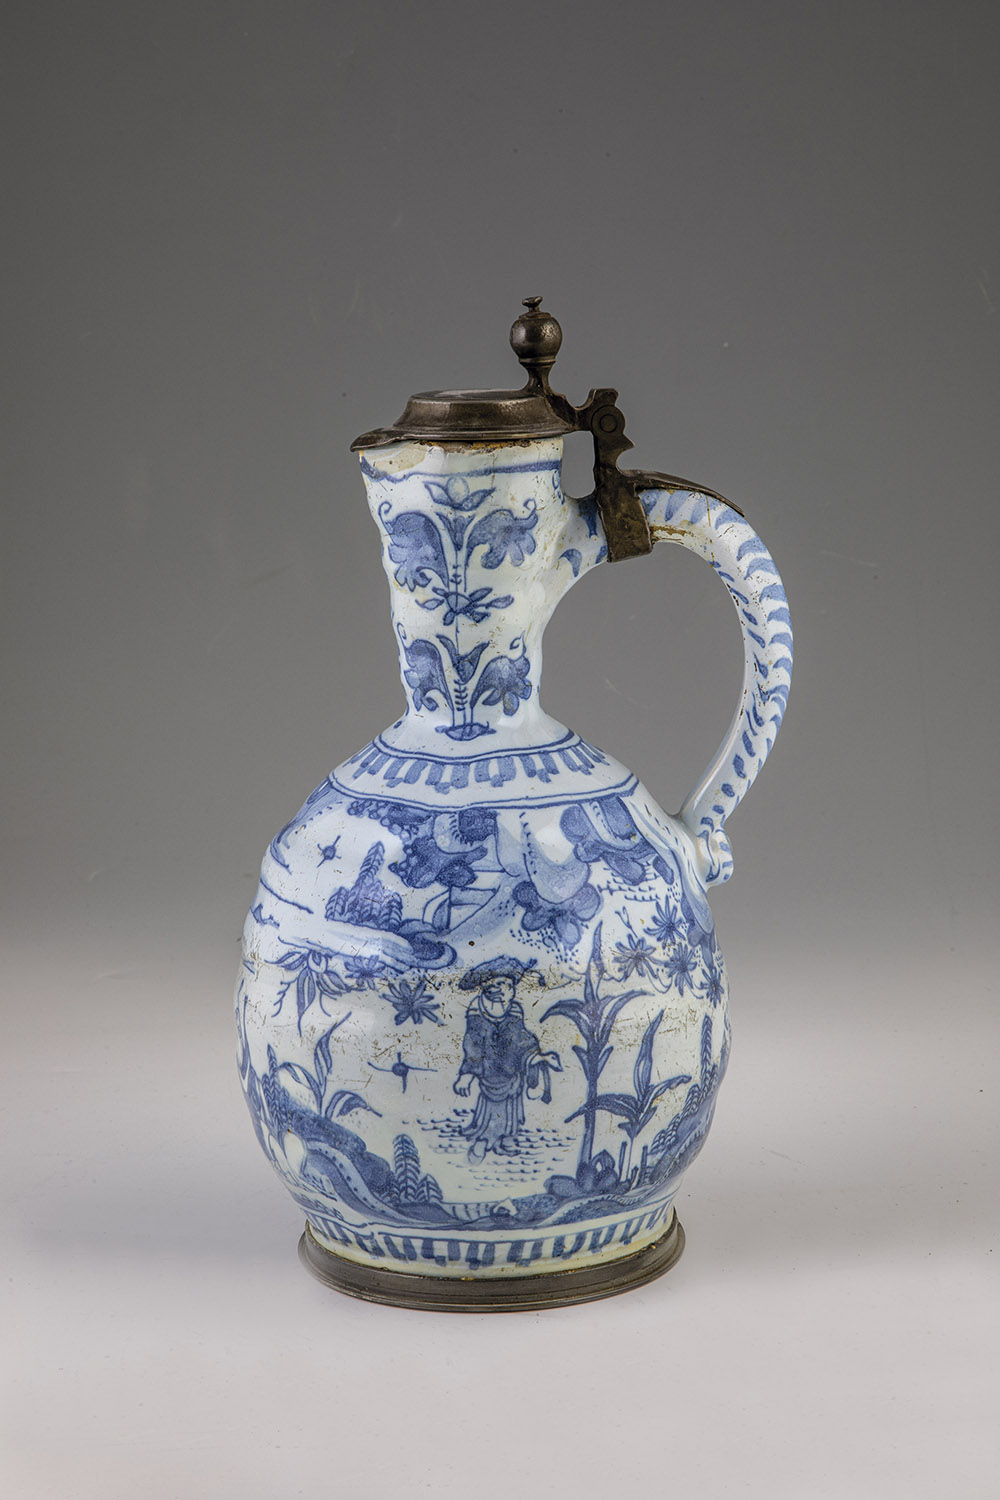 Narrow neck jug with chinoiserie